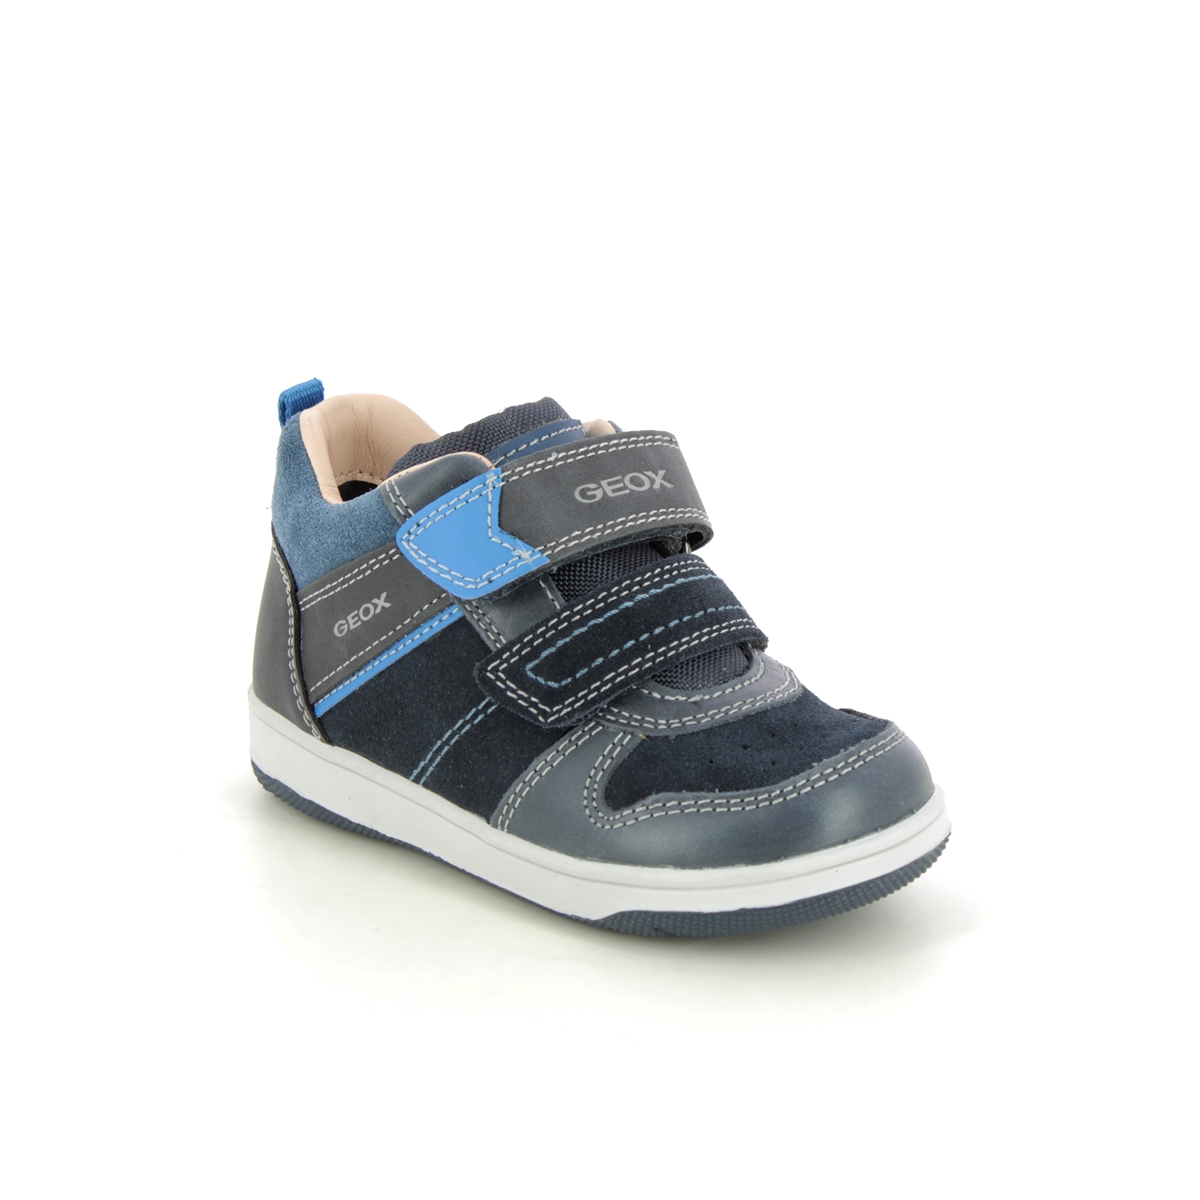 Geox - New Flick B 2V (Navy Leather) B161La-C4231 In Size 26 In Plain Navy Leather For kids